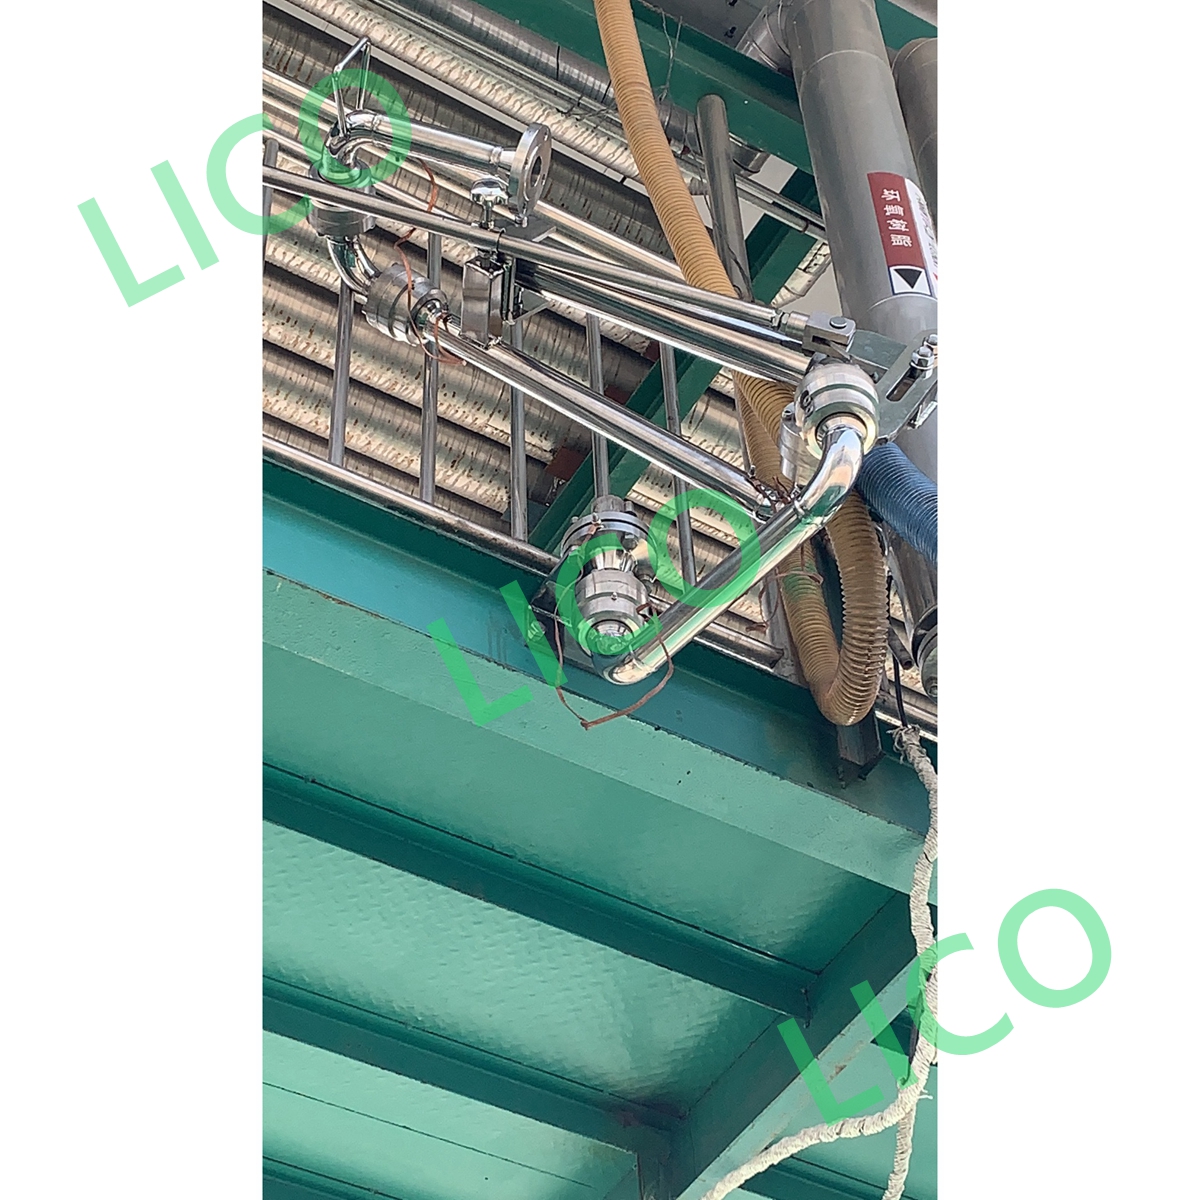 Gas Industrial Top Loading Arm for LPG Tanks